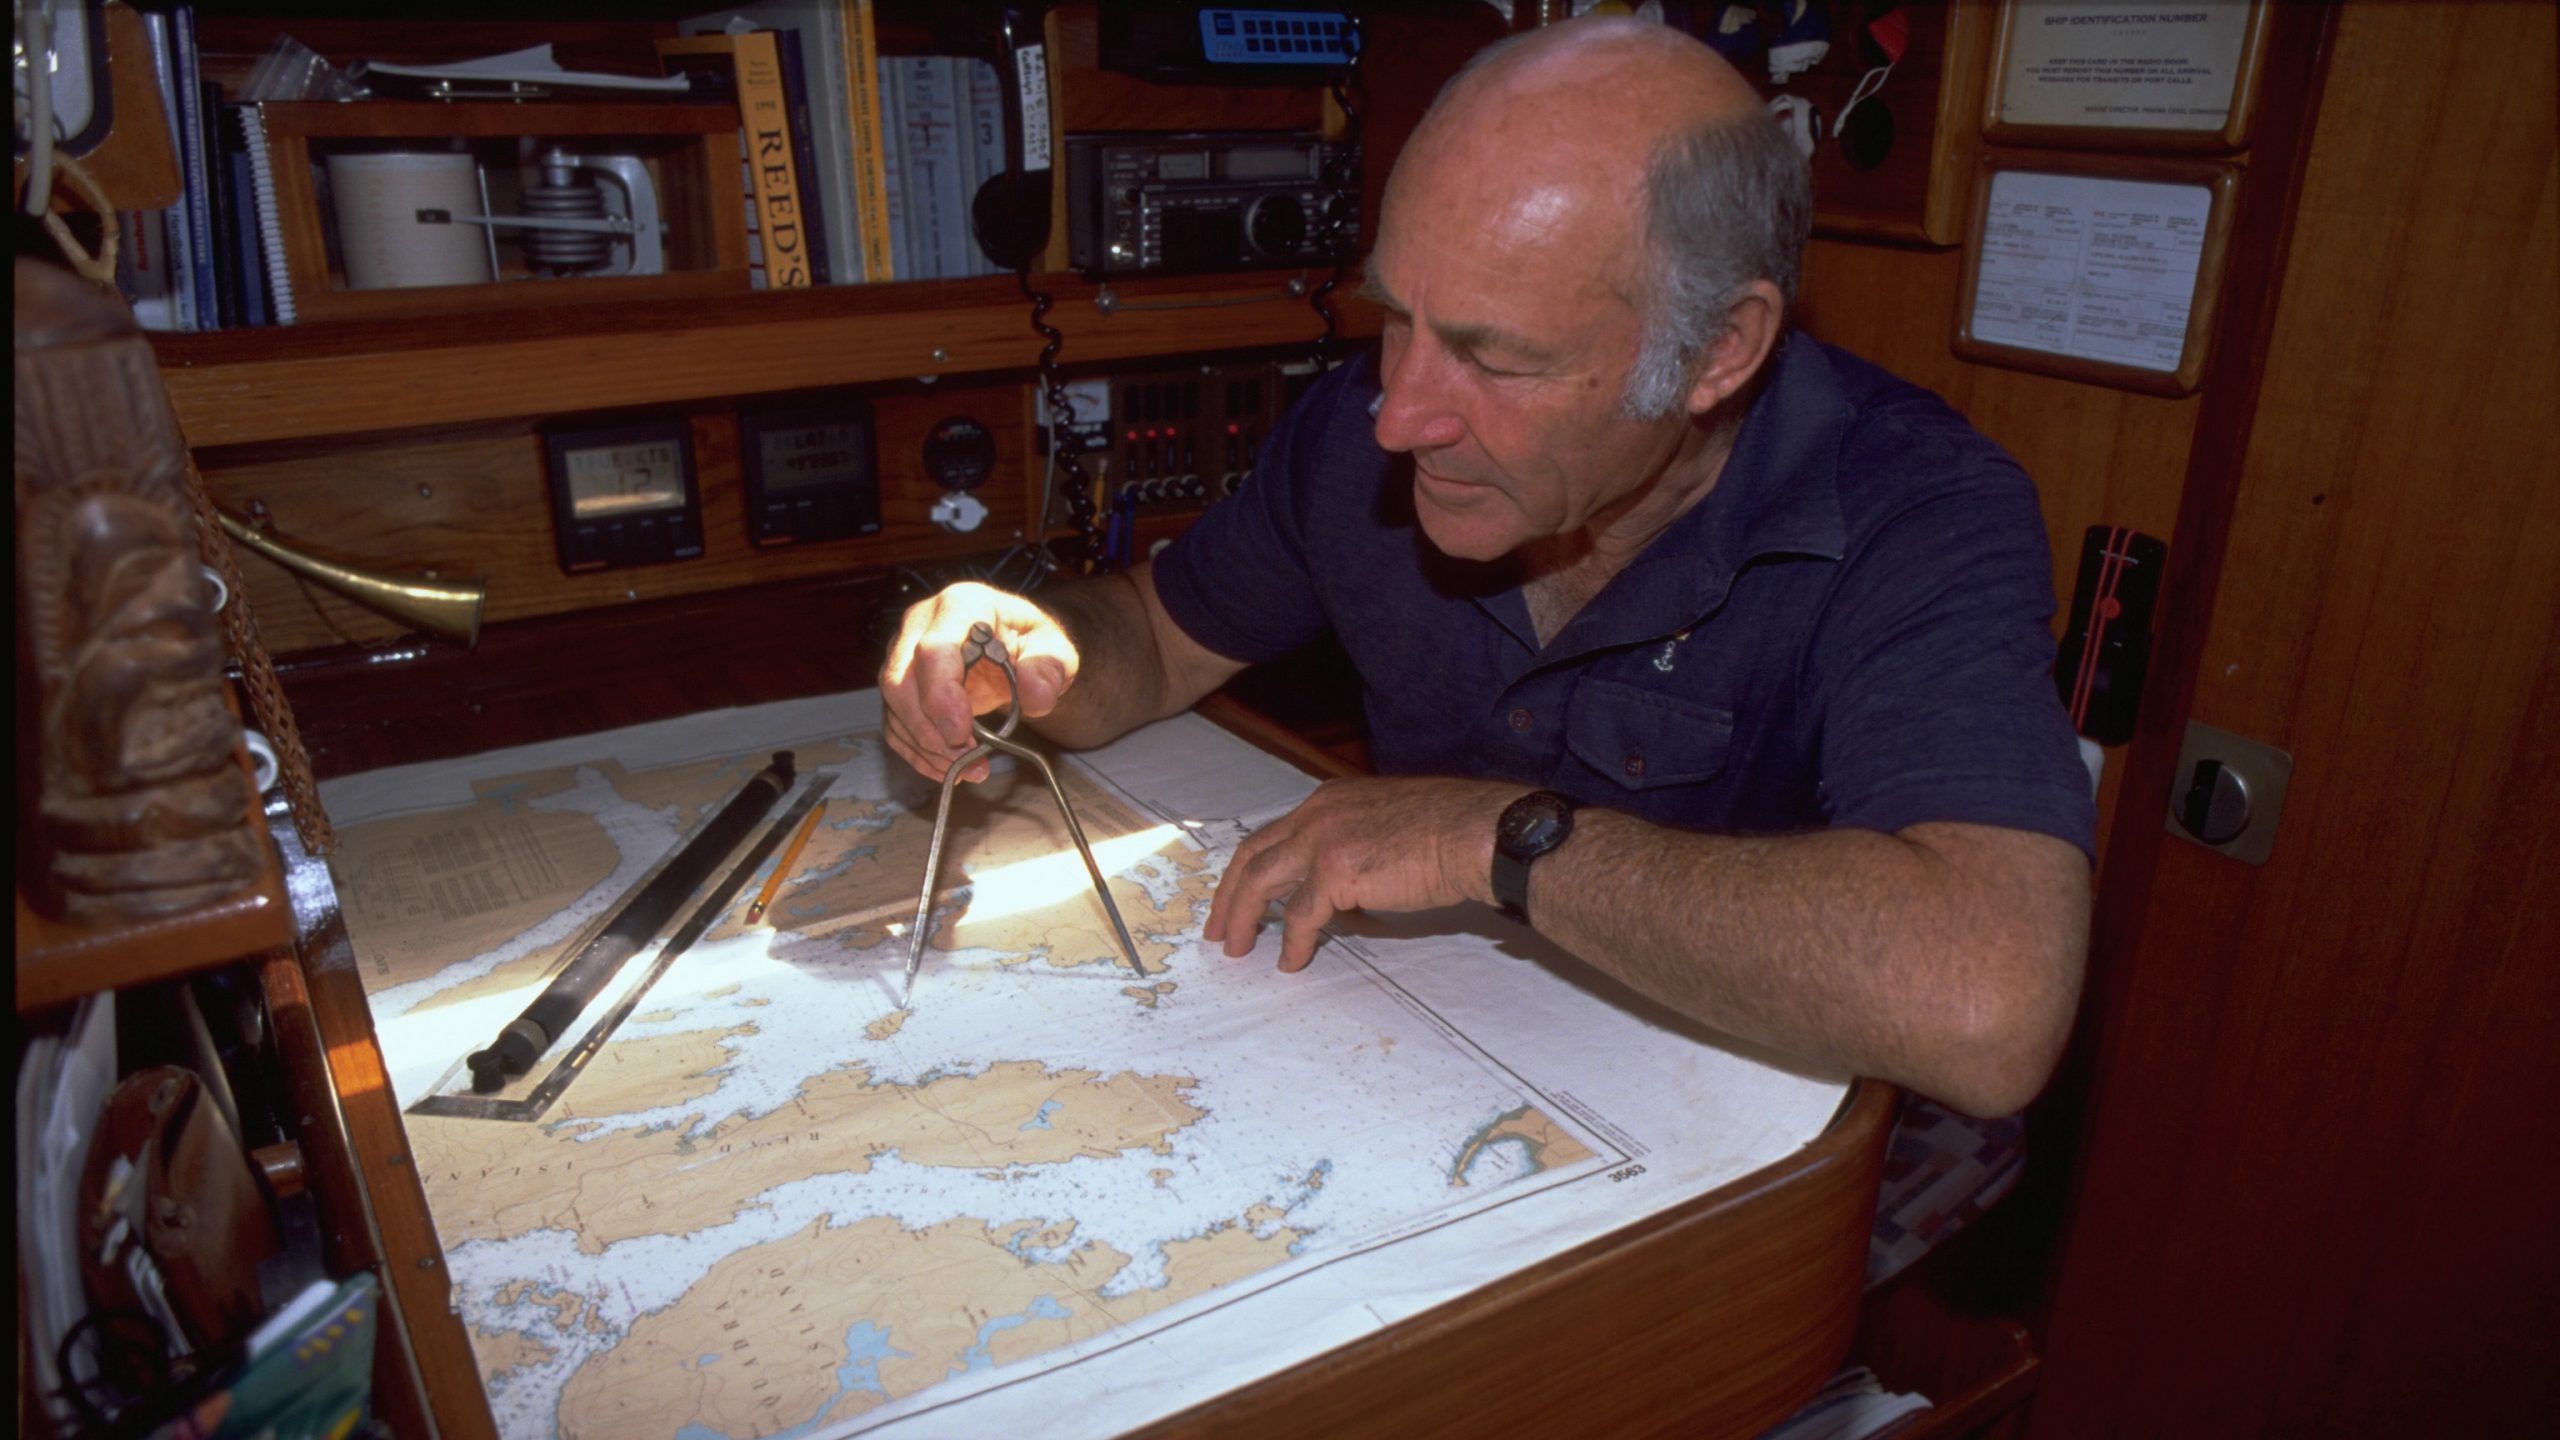 A man using paper charts to navigate on a boat